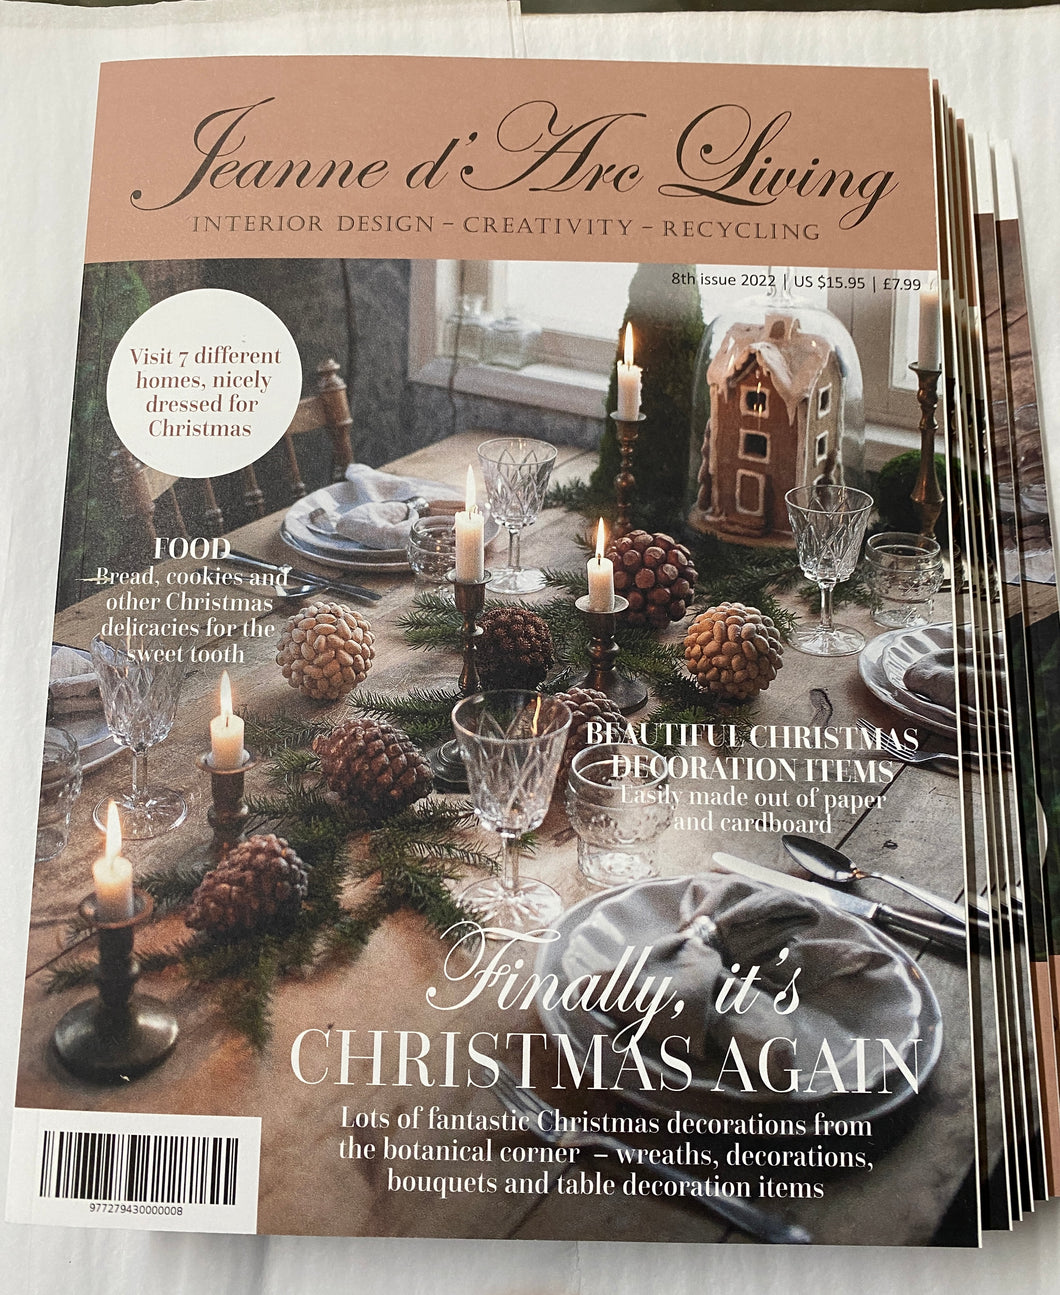 Jeanne d Arc living magazine 8th issue